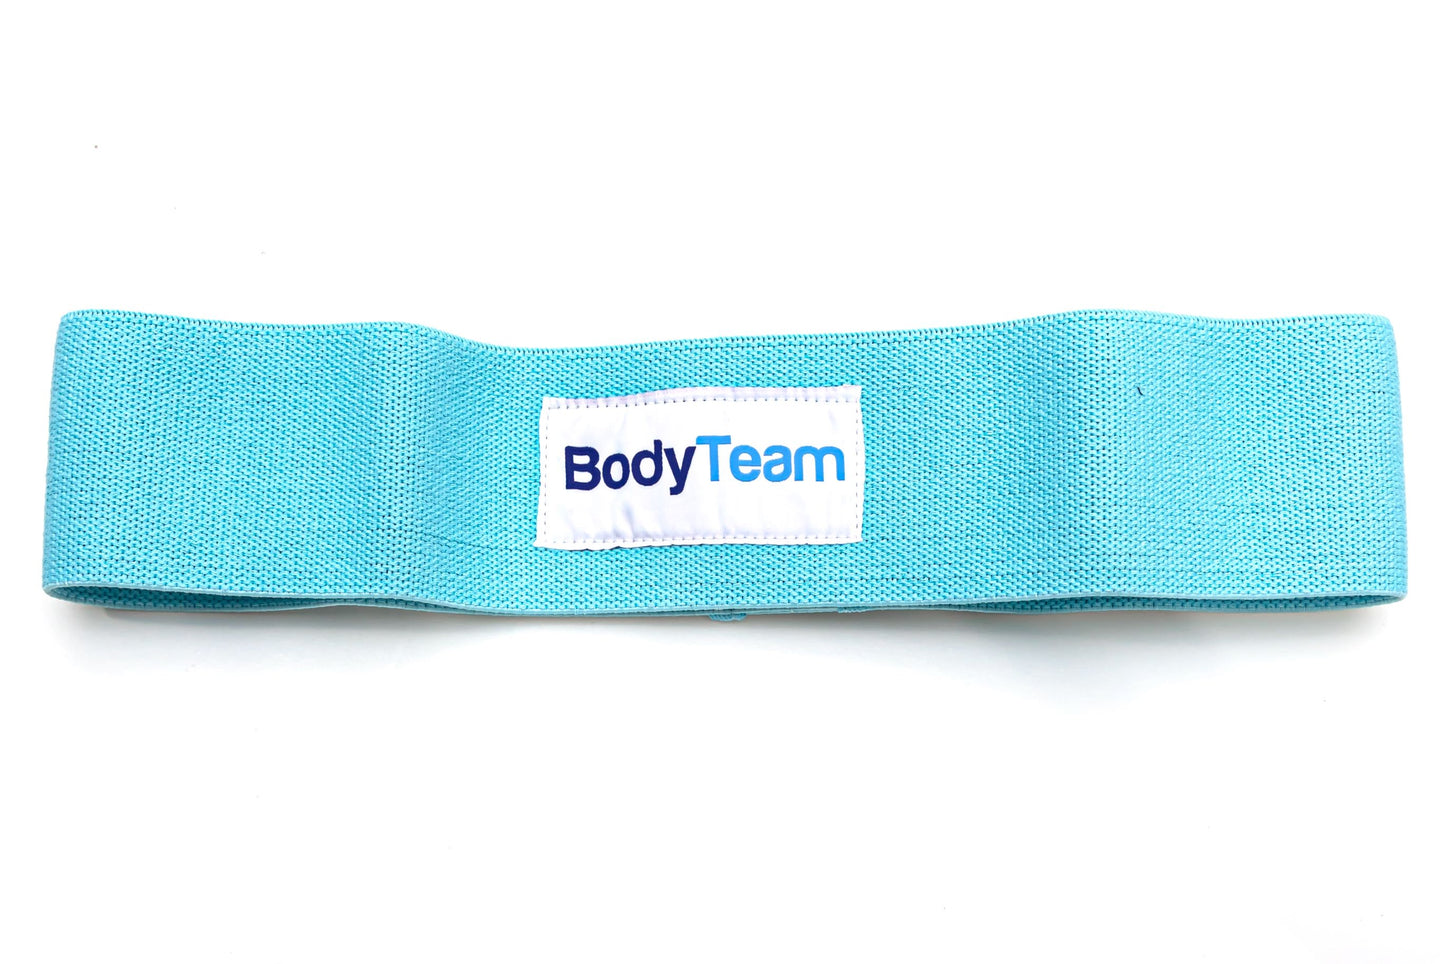 BodyTeam Fabric Resistance Band S, M, or L